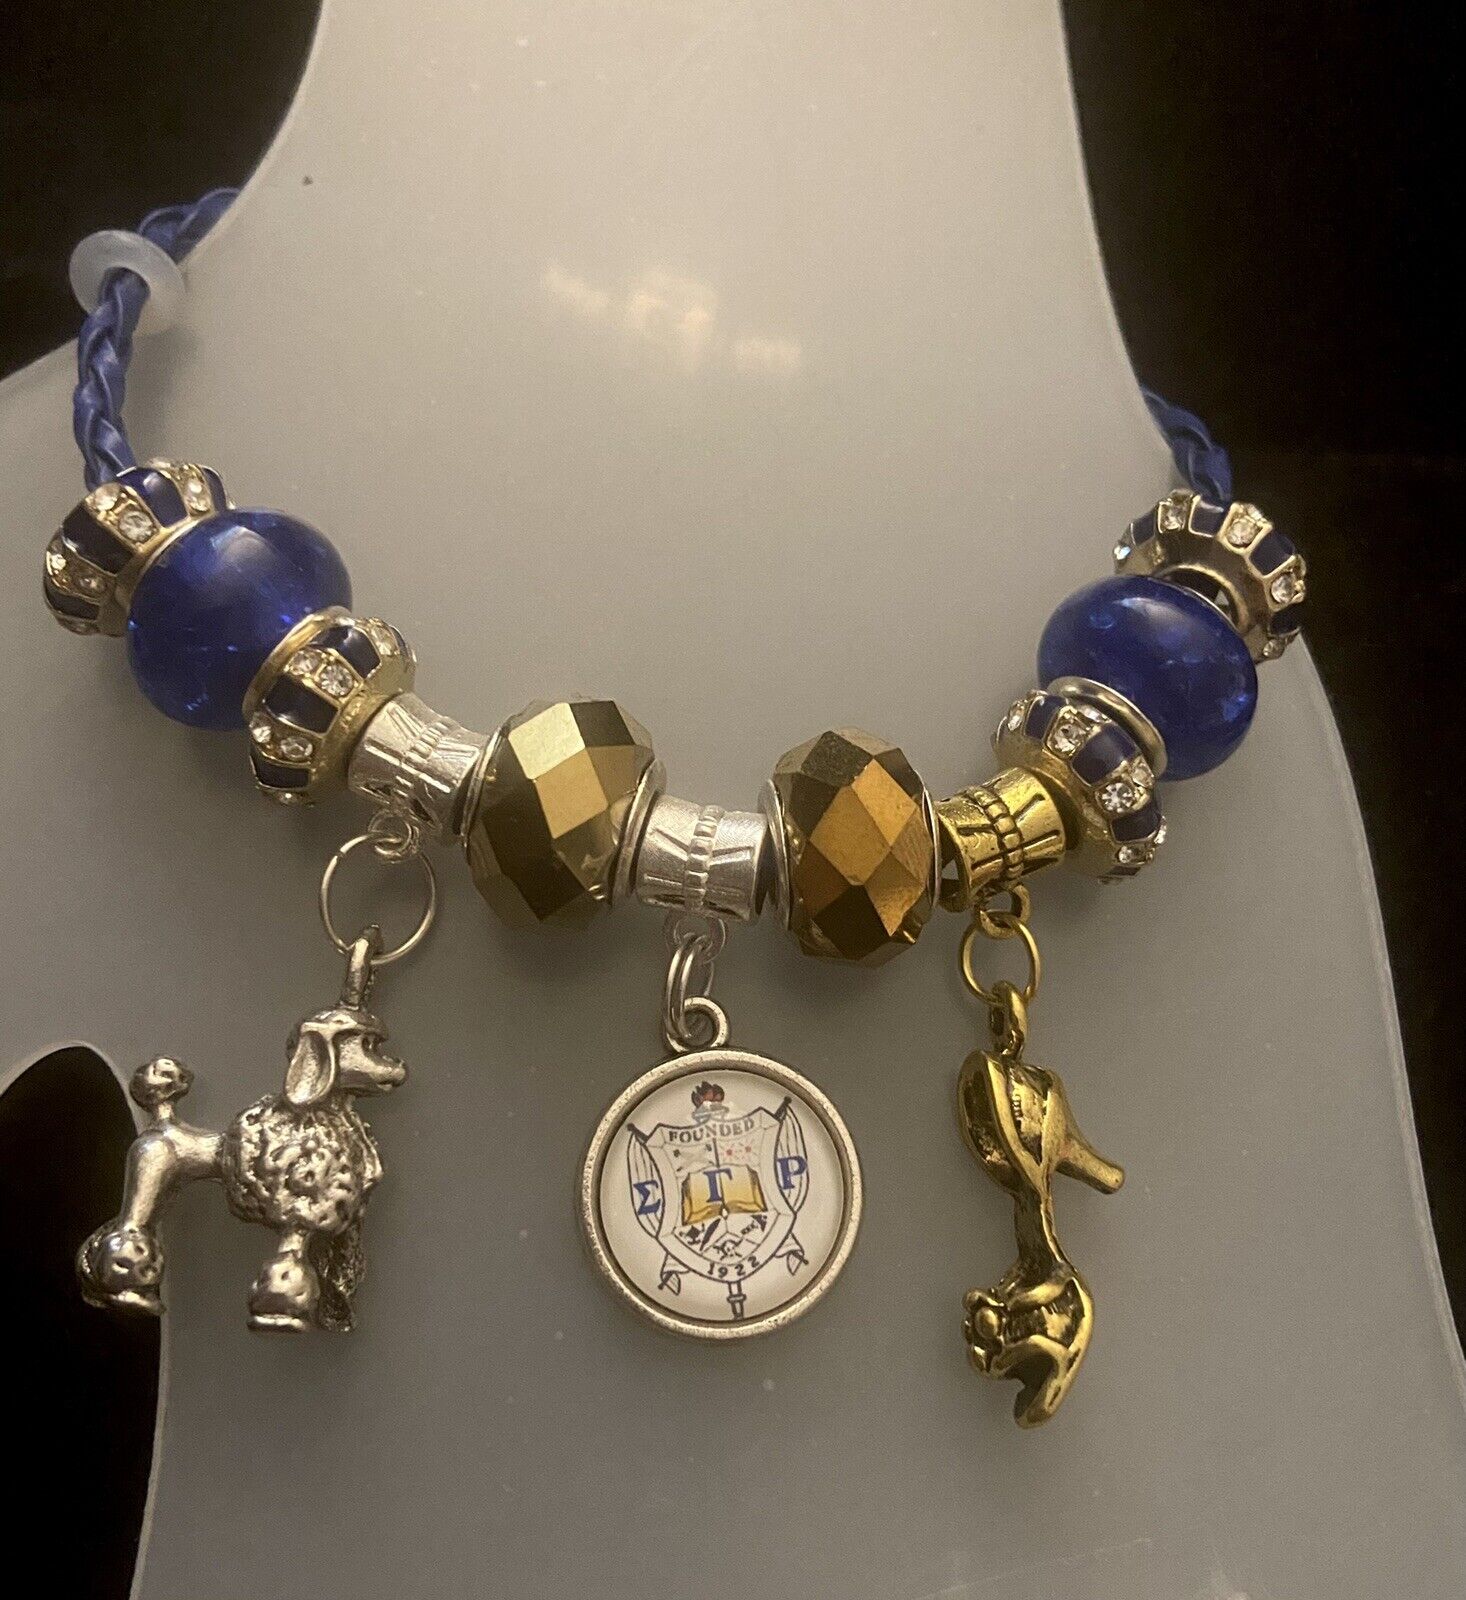 Divine 9 Inspired SGRHO European Blue Leather Bracelet With Charms 7.87in-0078